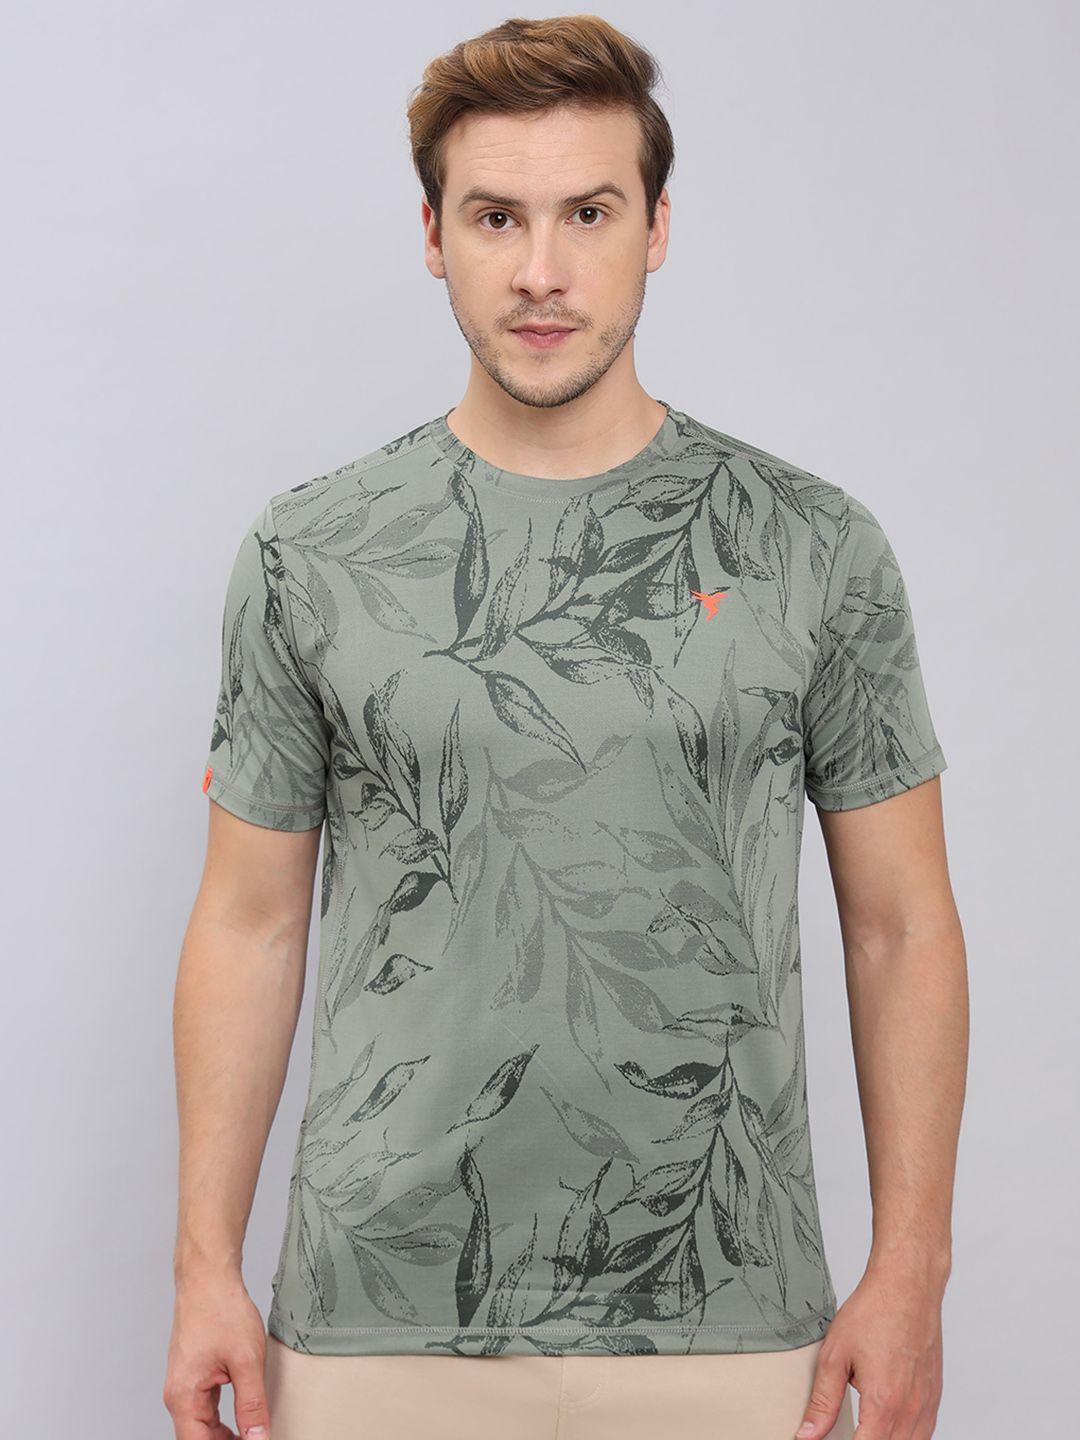 technosport floral printed antimicrobial slim fit cotton t-shirt